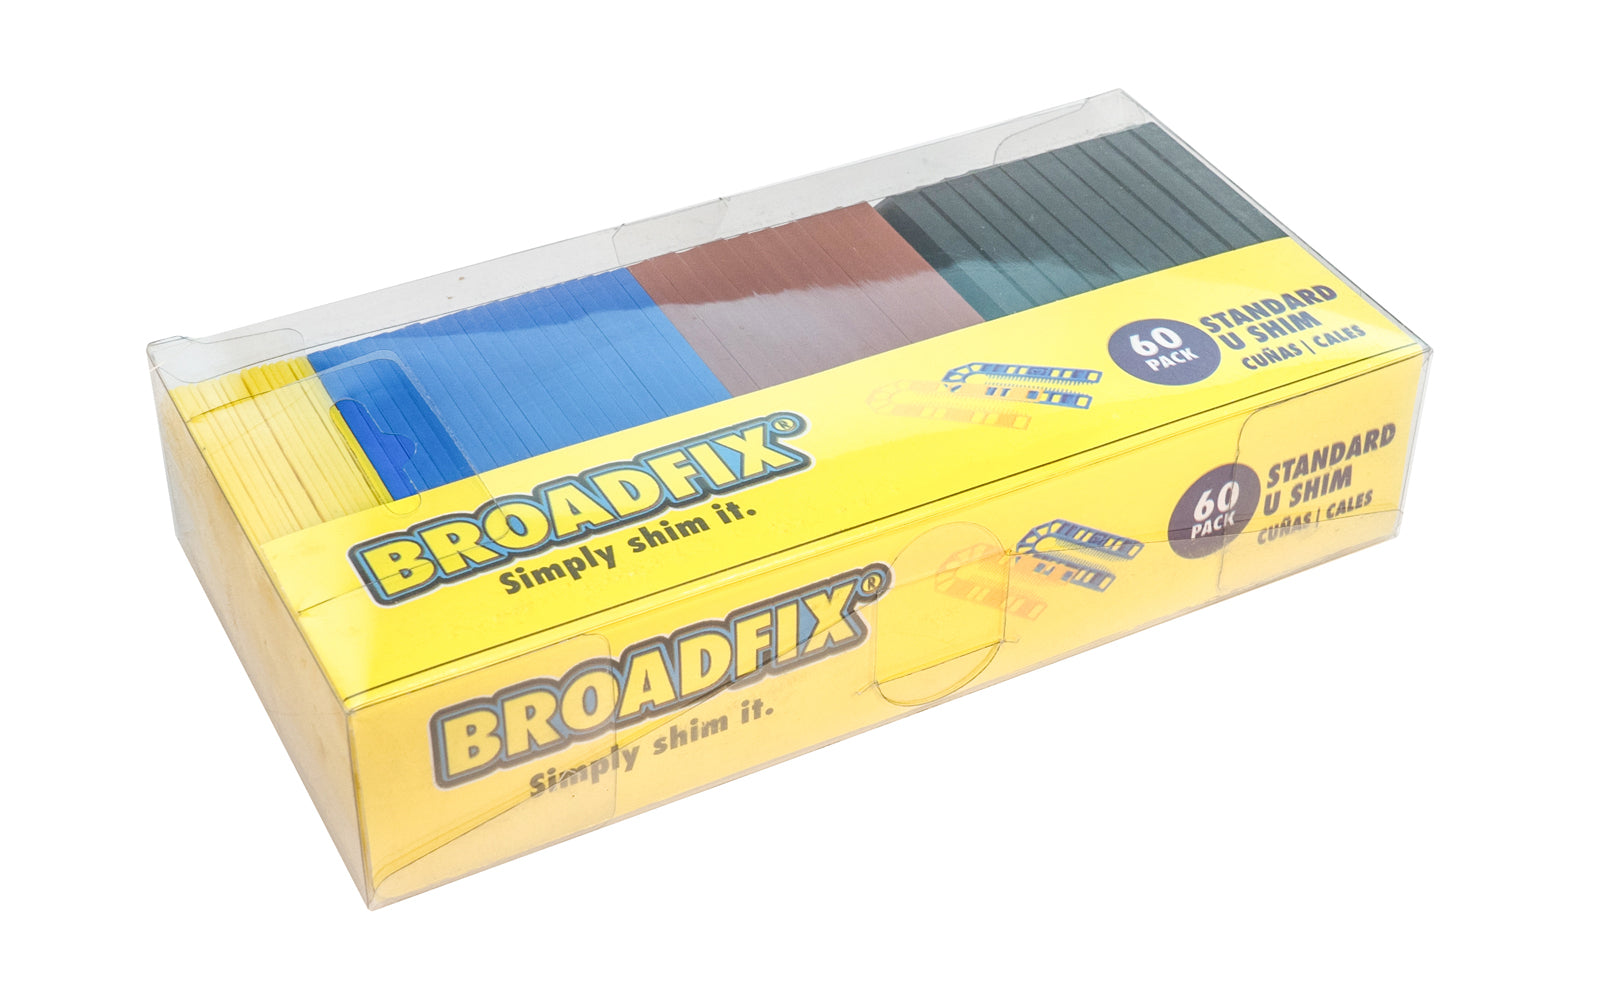 These 4" x 1-3/4" plastic standard U shims by Broadfix are great for a variety of applications. Use for doors, windows, cabinets, countertops, leveling appliances, floors, craft projects etc. 60 pack bundle. Includes 10 each of the following sizes: 1/32" (1 mm), 1/8" (3 mm), 3/16" (5 mm), 1/4" (6 mm). 5060172010981